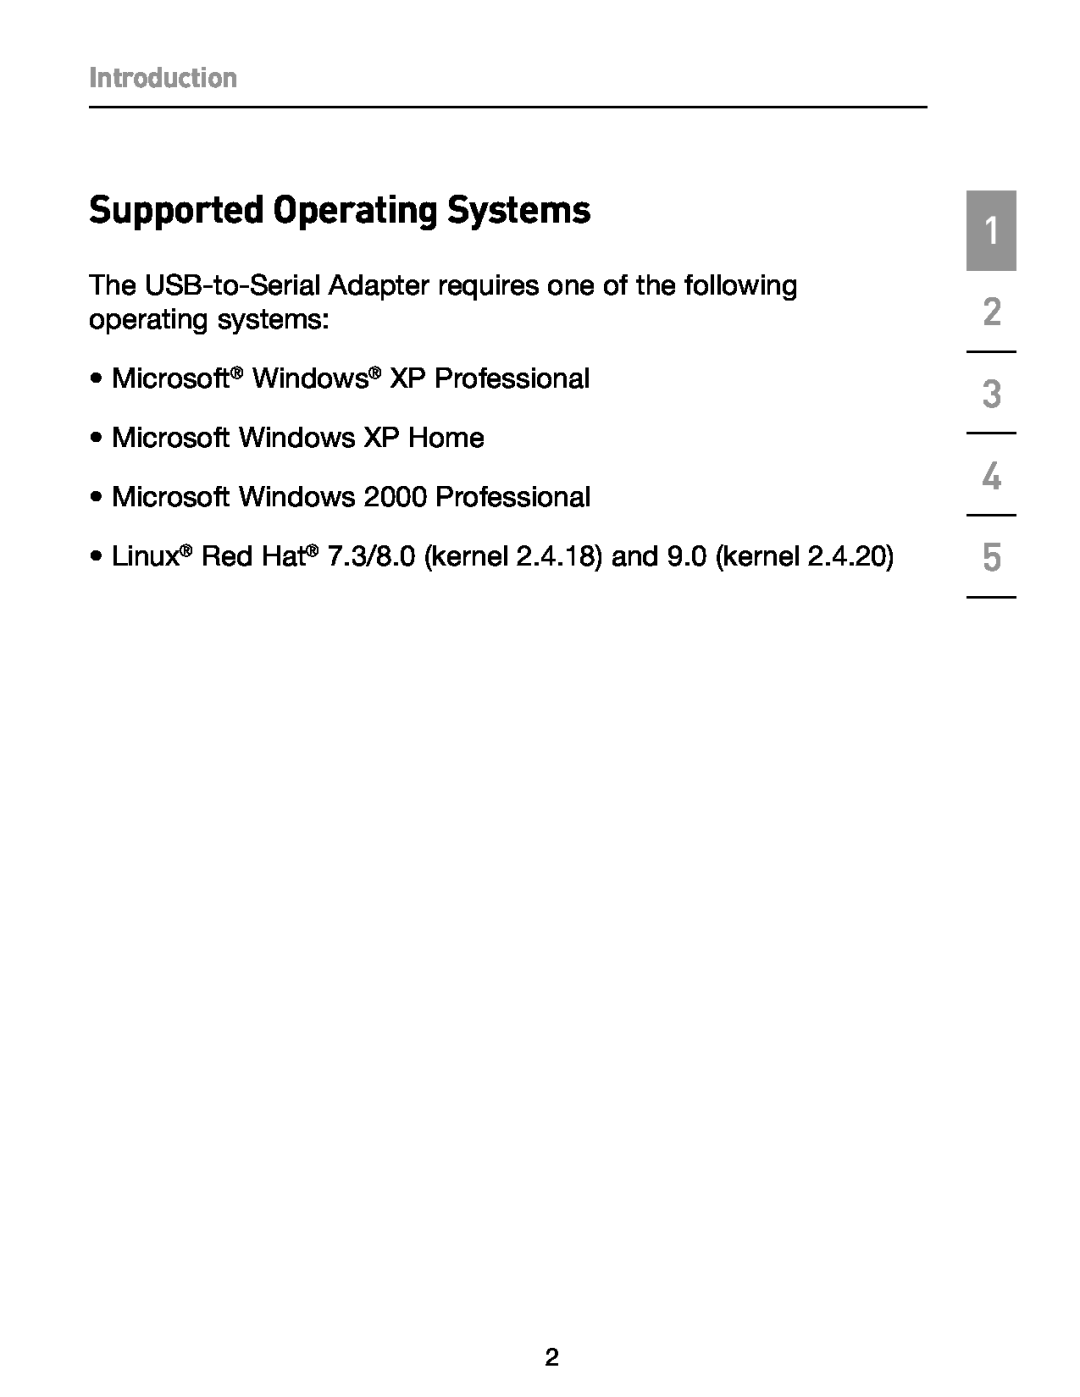 Belkin F5U257 Supported Operating Systems, Introduction, Microsoft Windows XP Professional Microsoft Windows XP Home 